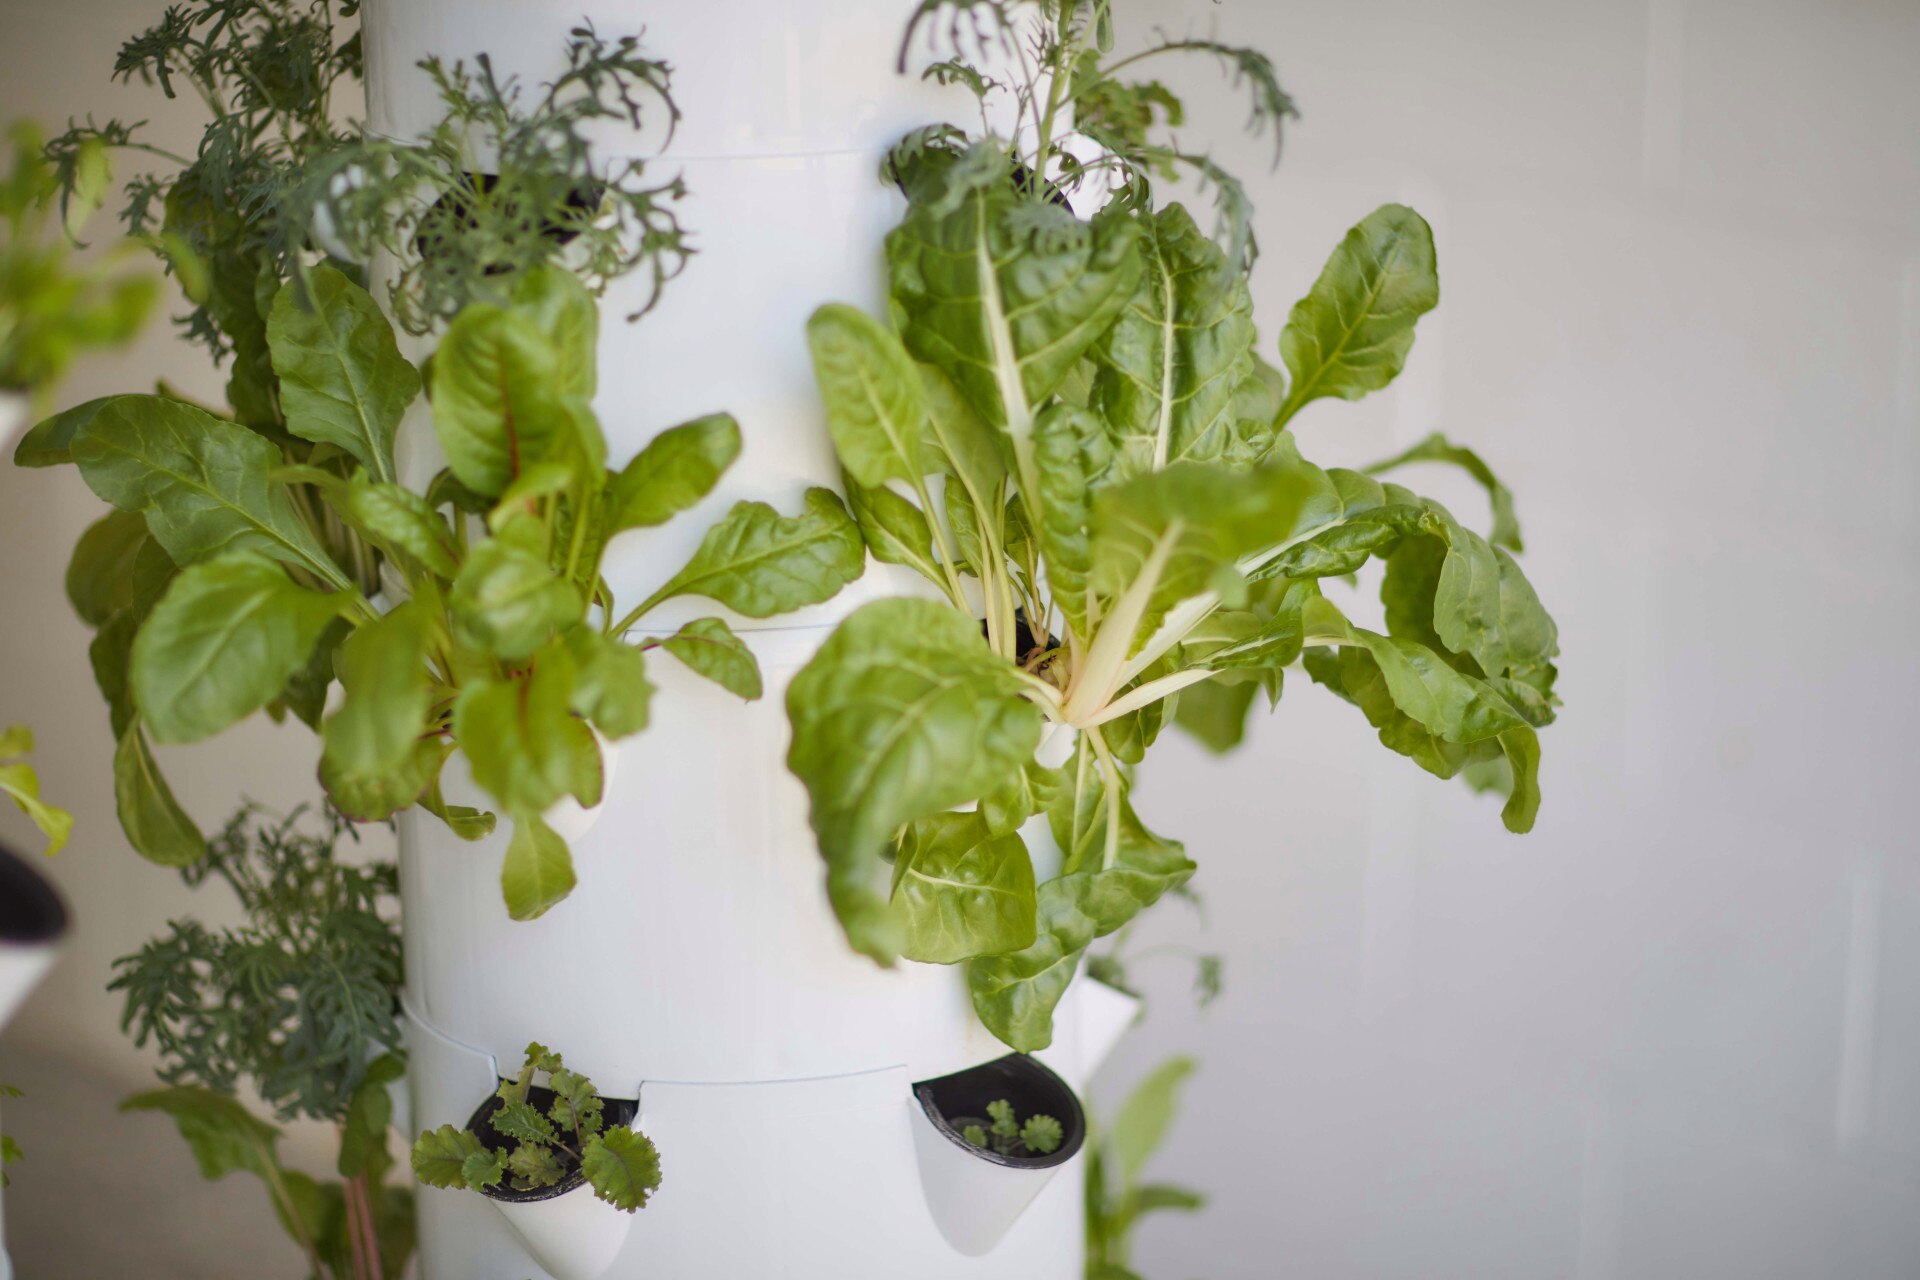 Calling all green thumbs: urban gardening just got a whole lot easier and more sustainable